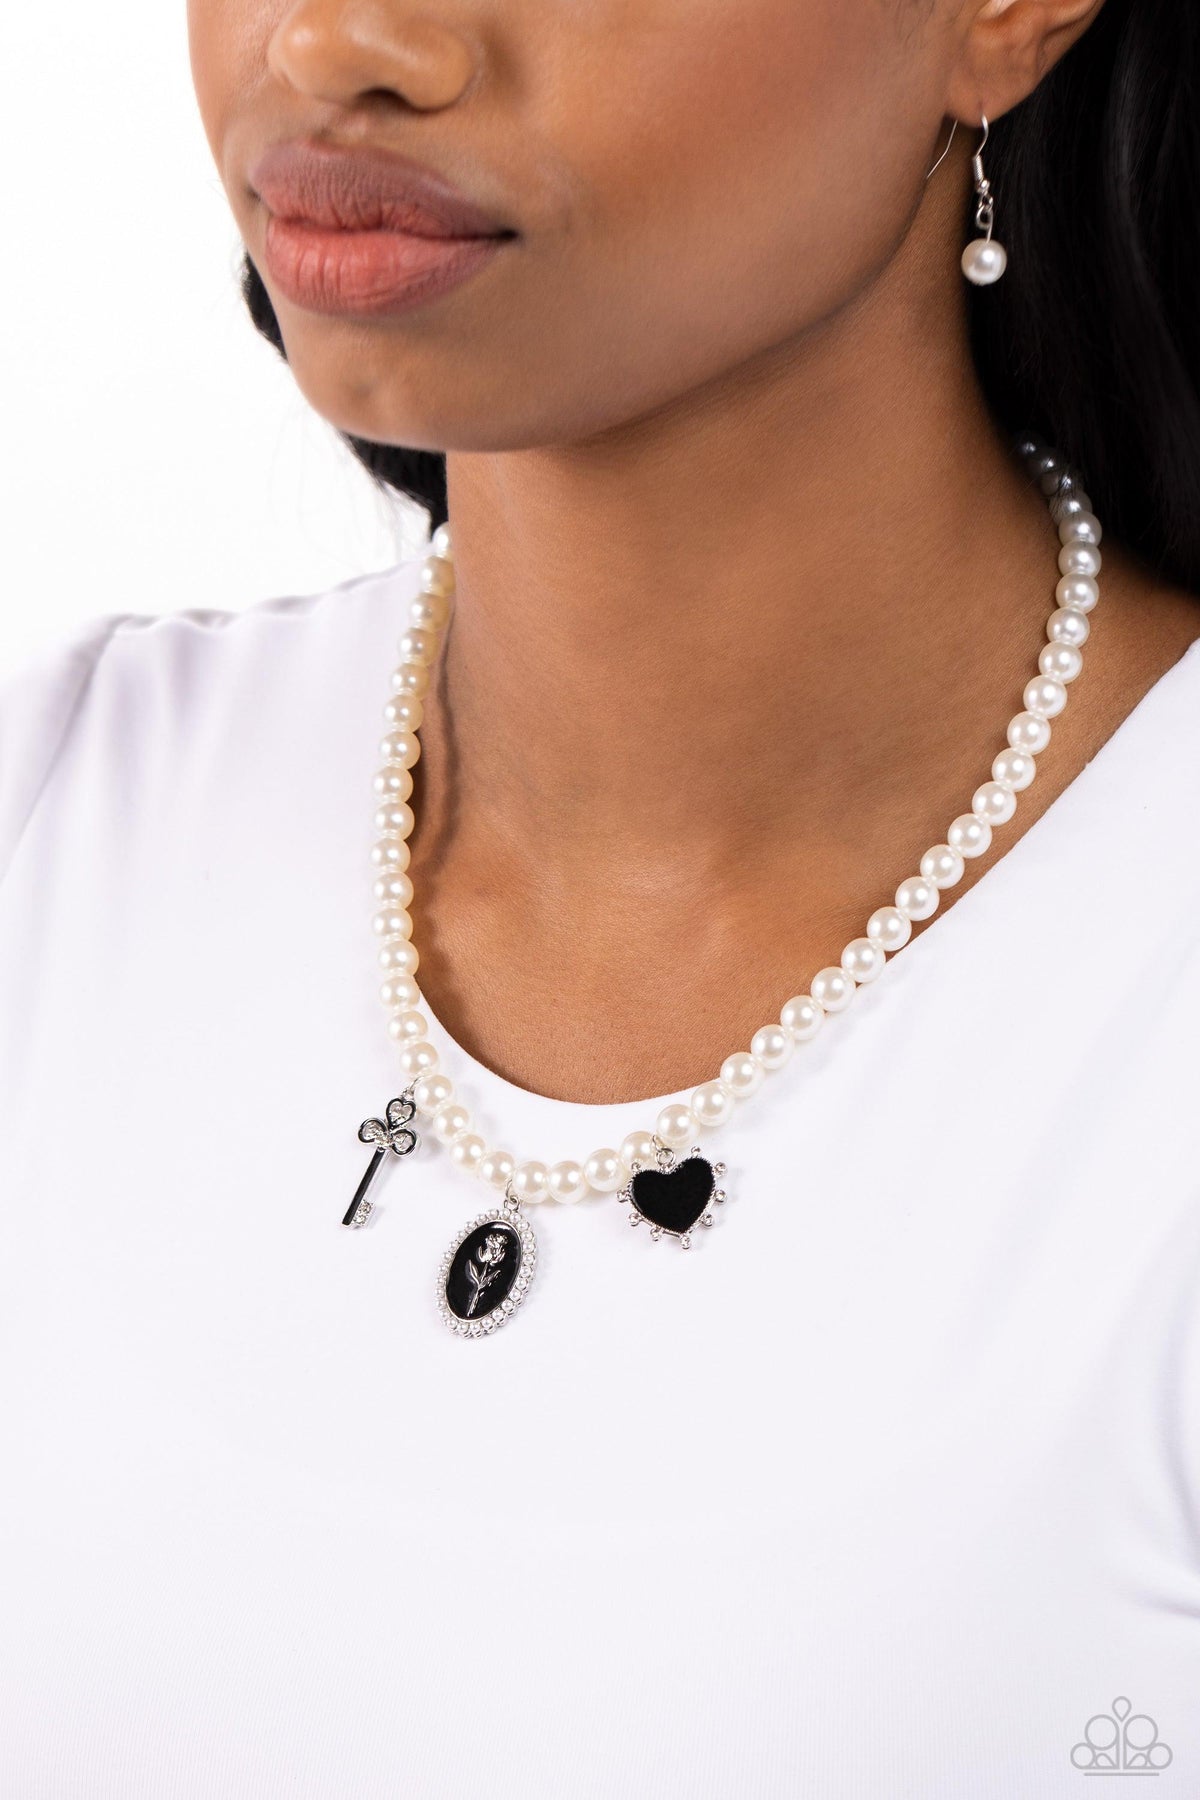 Charming Collision Black Charm &amp; White Pearl Necklace - Paparazzi Accessories-on model - CarasShop.com - $5 Jewelry by Cara Jewels